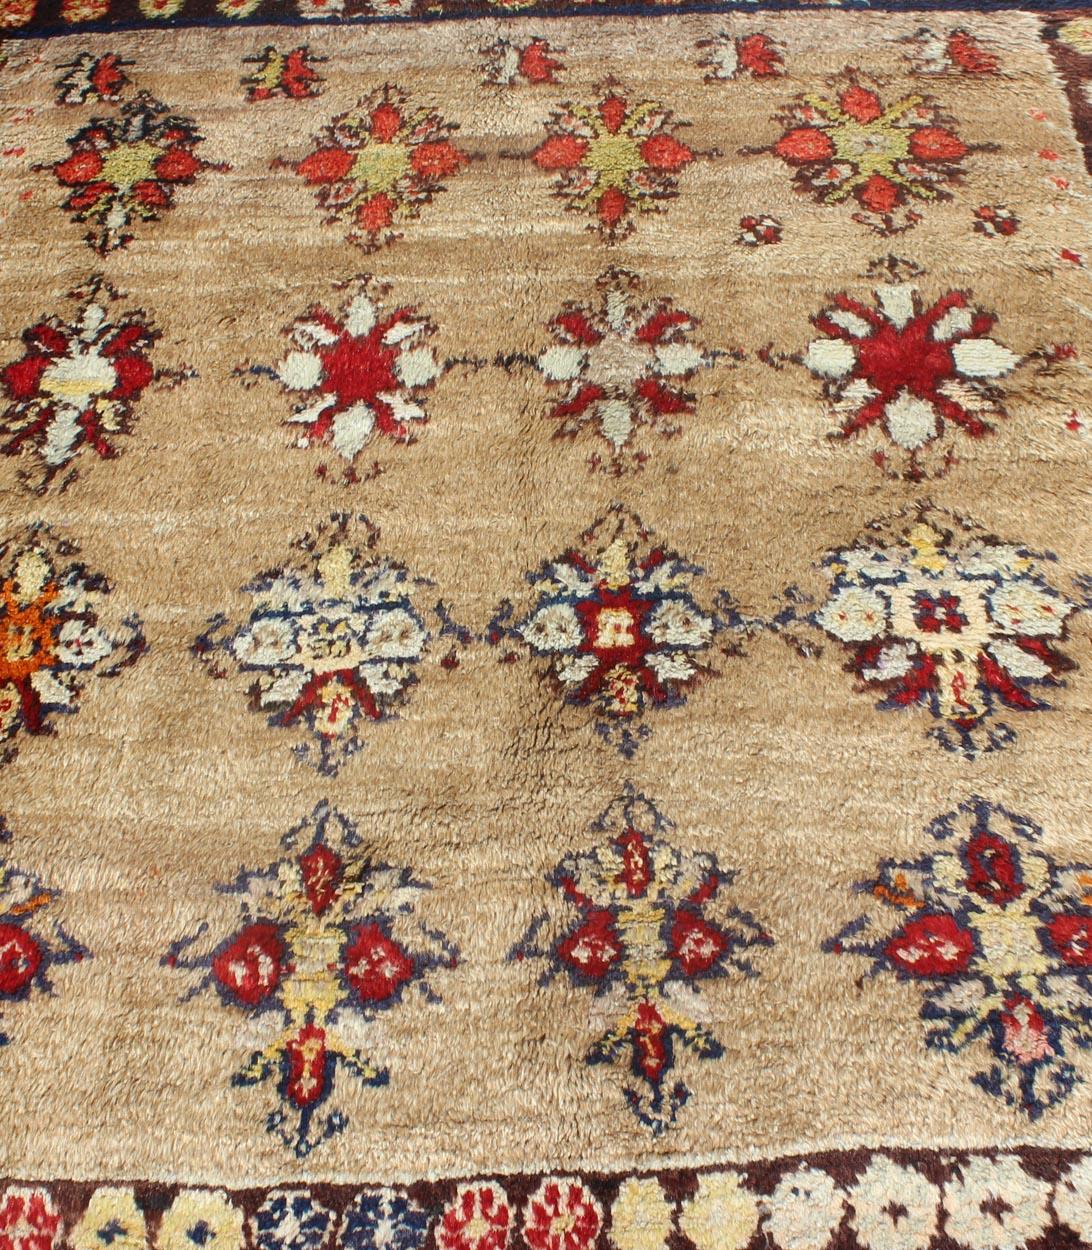 Angora Turkish Tulu Carpet with Colorful Floral Designs Set on Sand Field For Sale 3